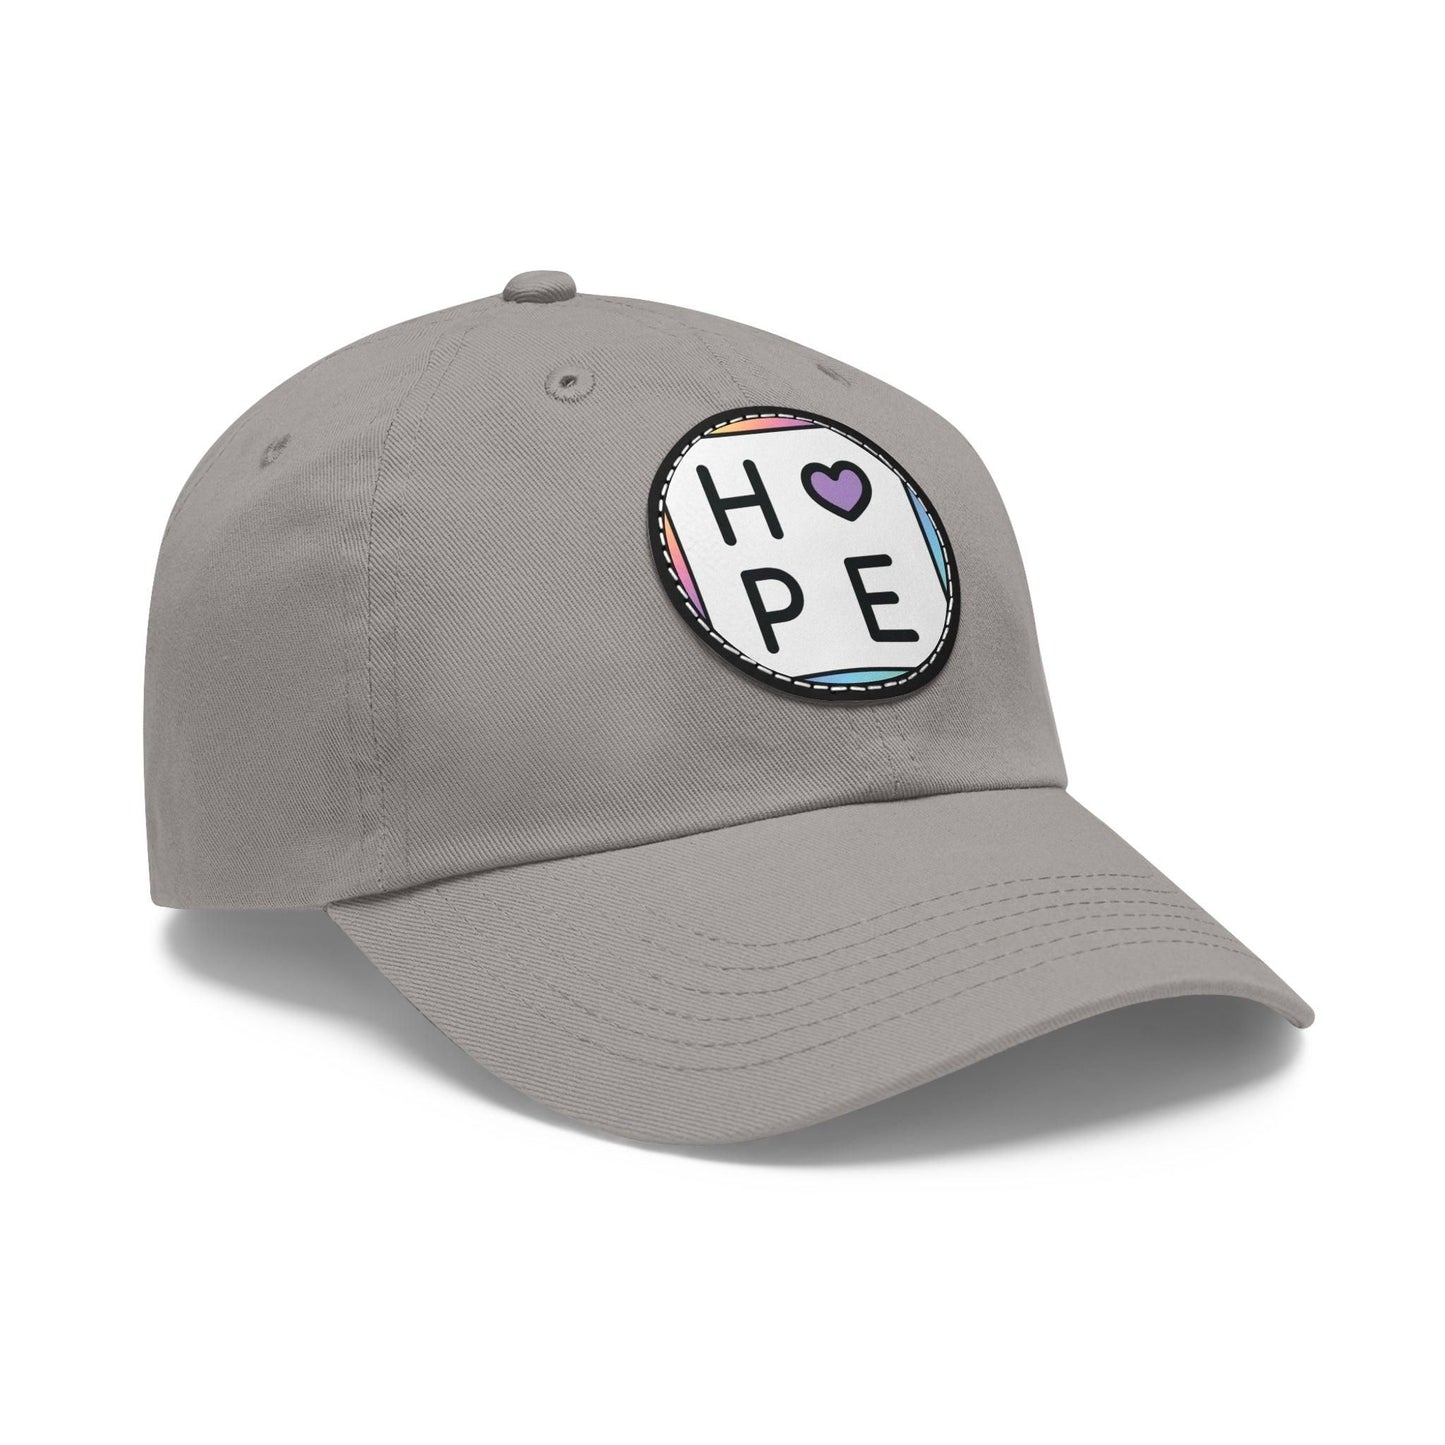 Hope Baseball Cap with Leather Patch Cap Grey / Black patch Circle One size